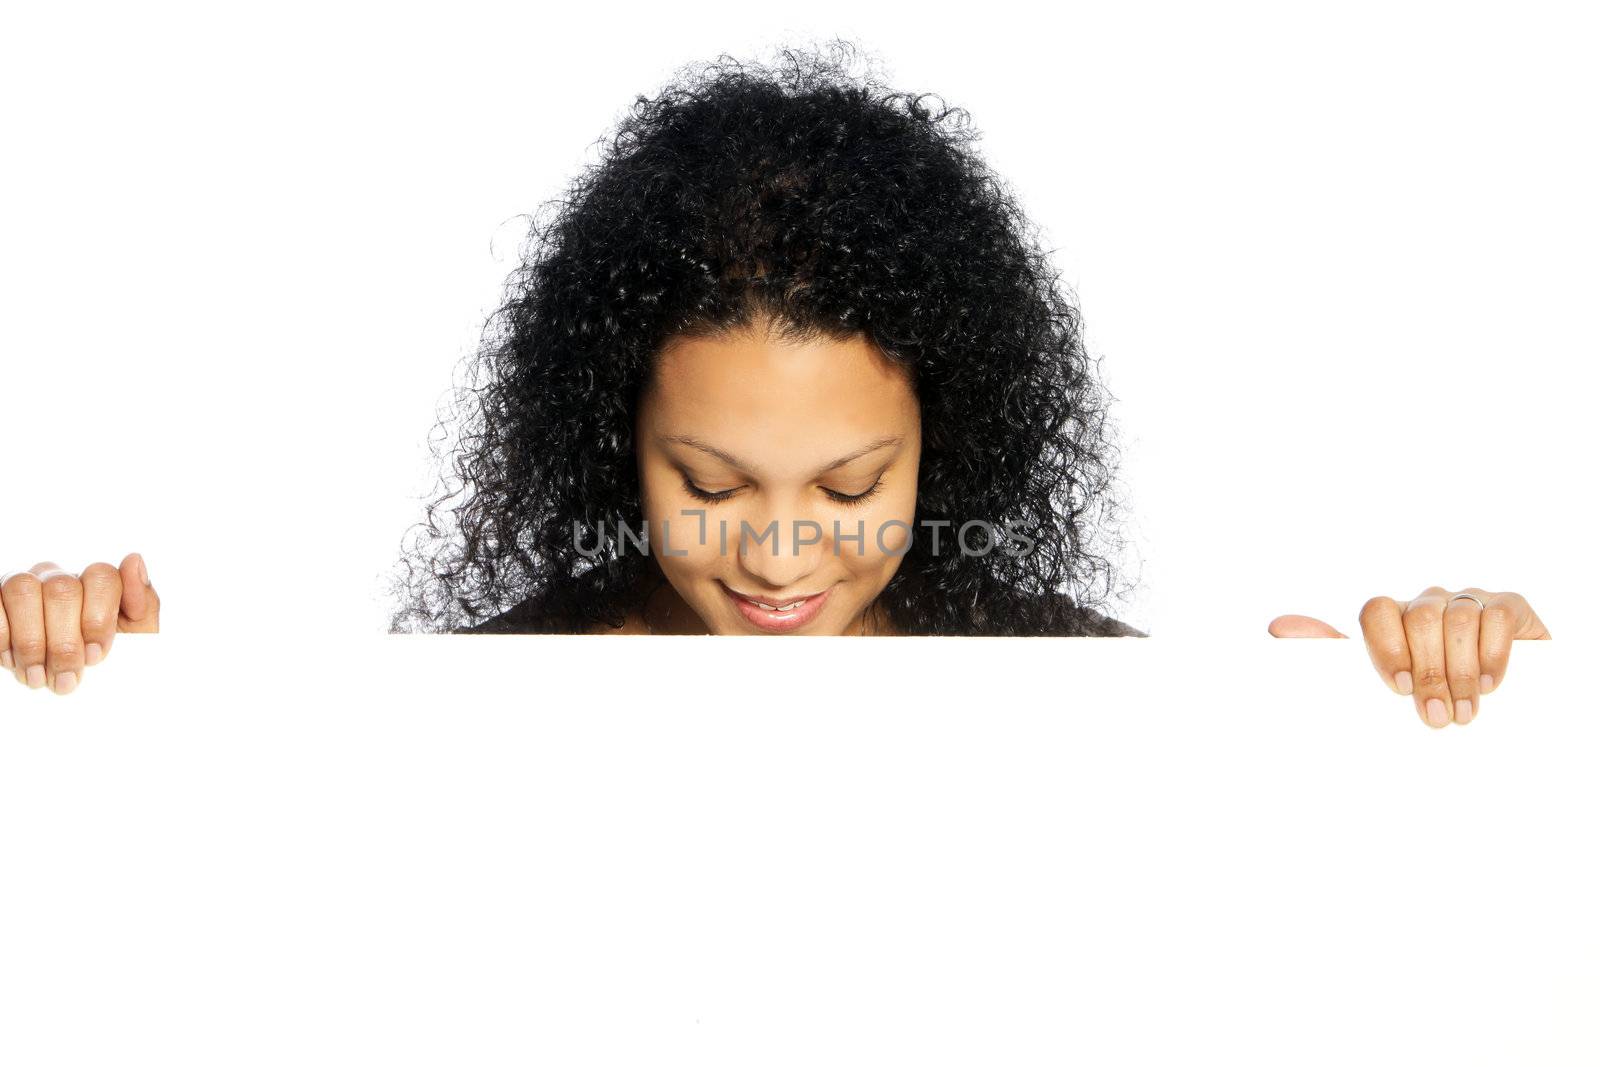 Attractive young African American lady with lovely curly black hair standing looking down at a white blank sign that she is holding in her hands sign that she is holding in her hands